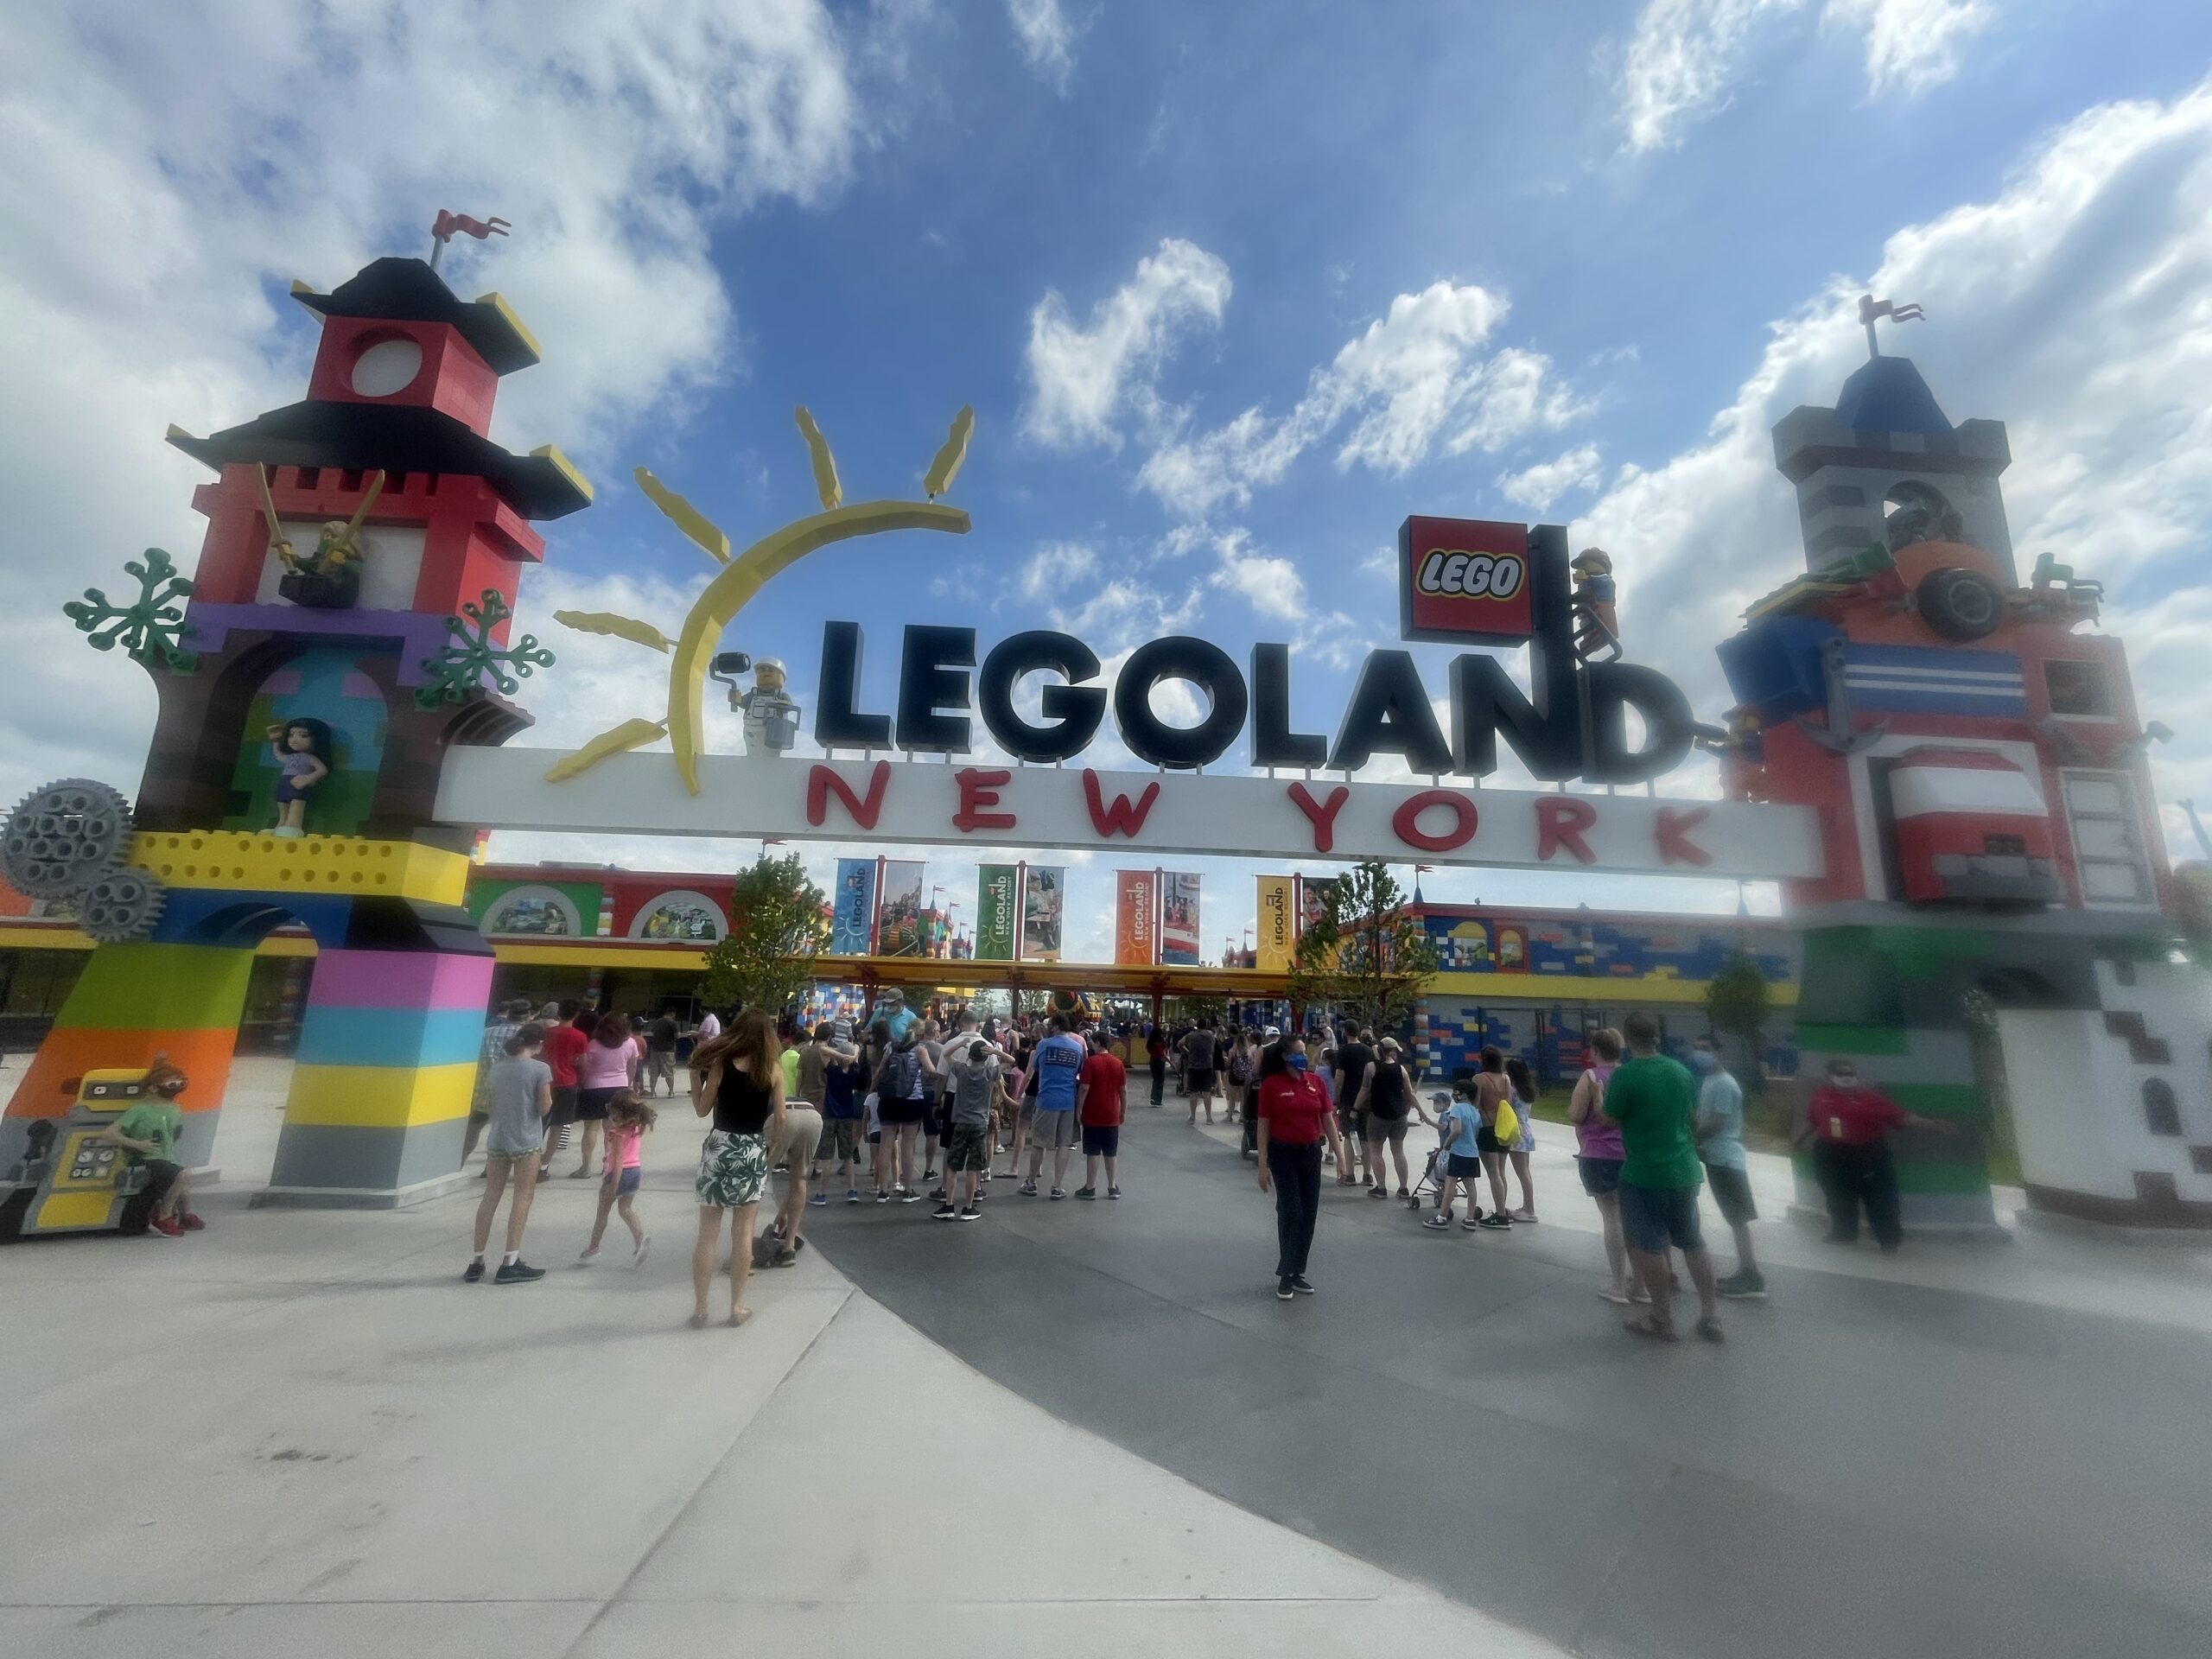 Legoland New York: What you need to know if you go